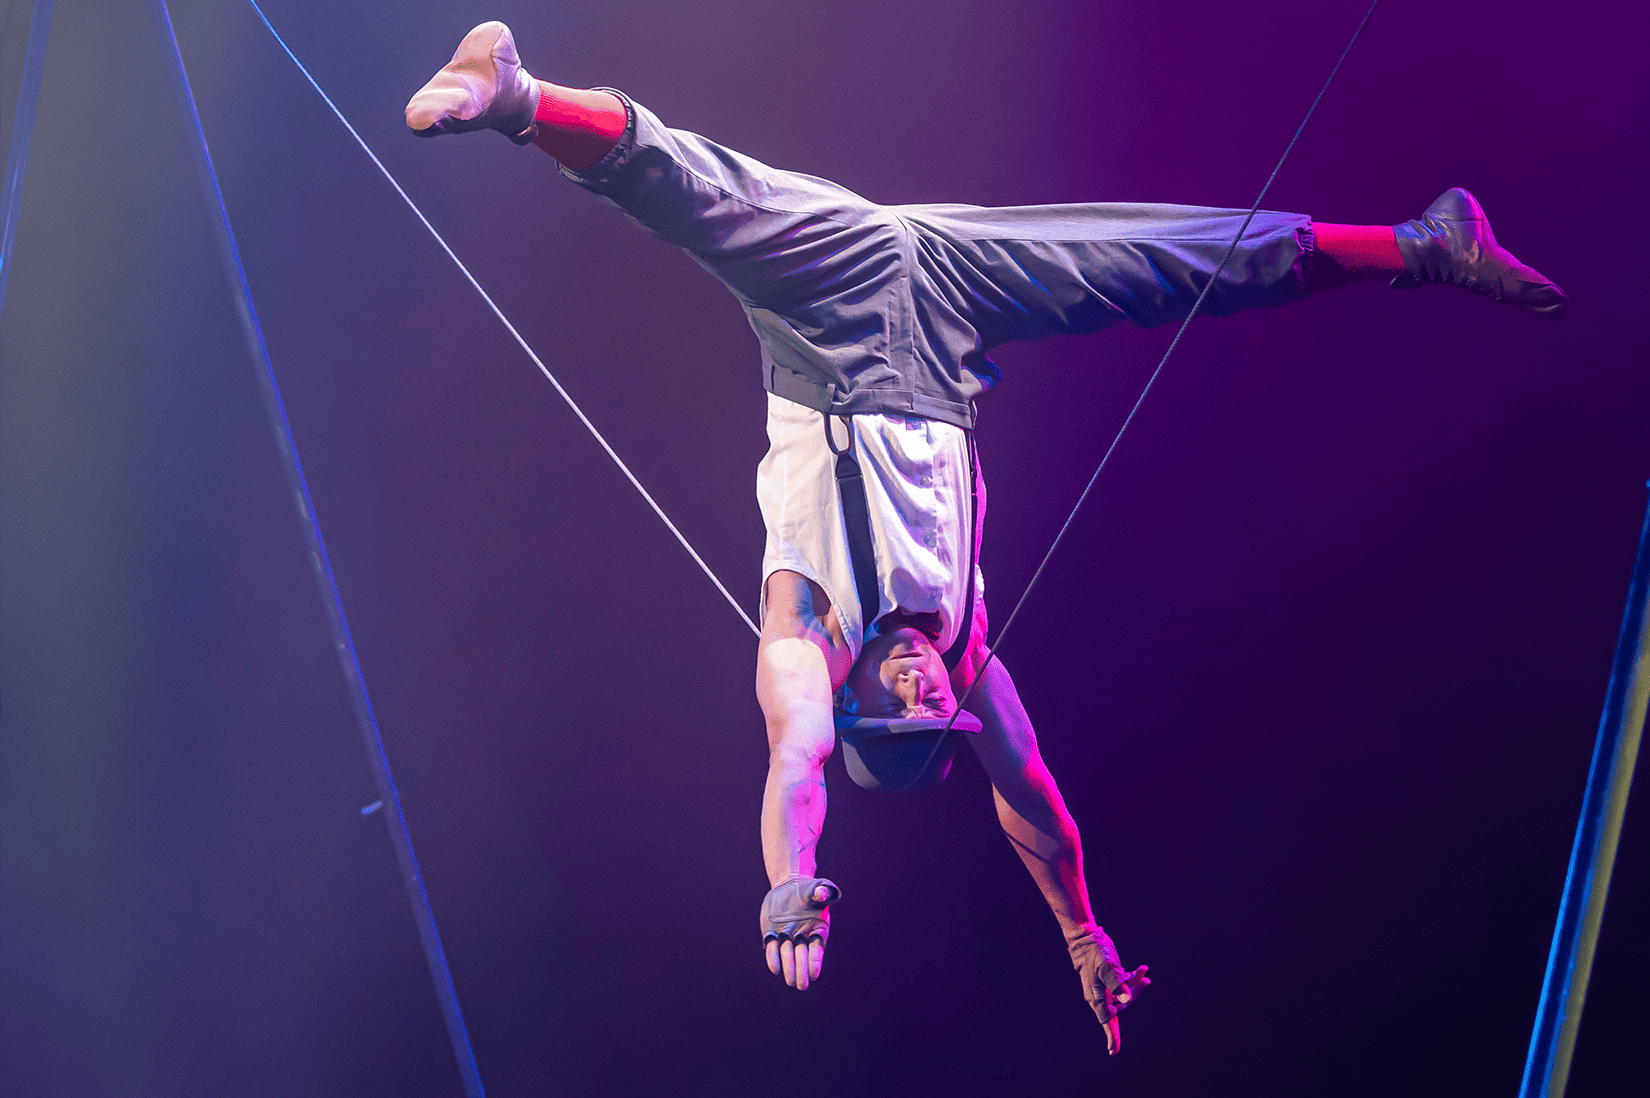 A man balances upside down from a wire.